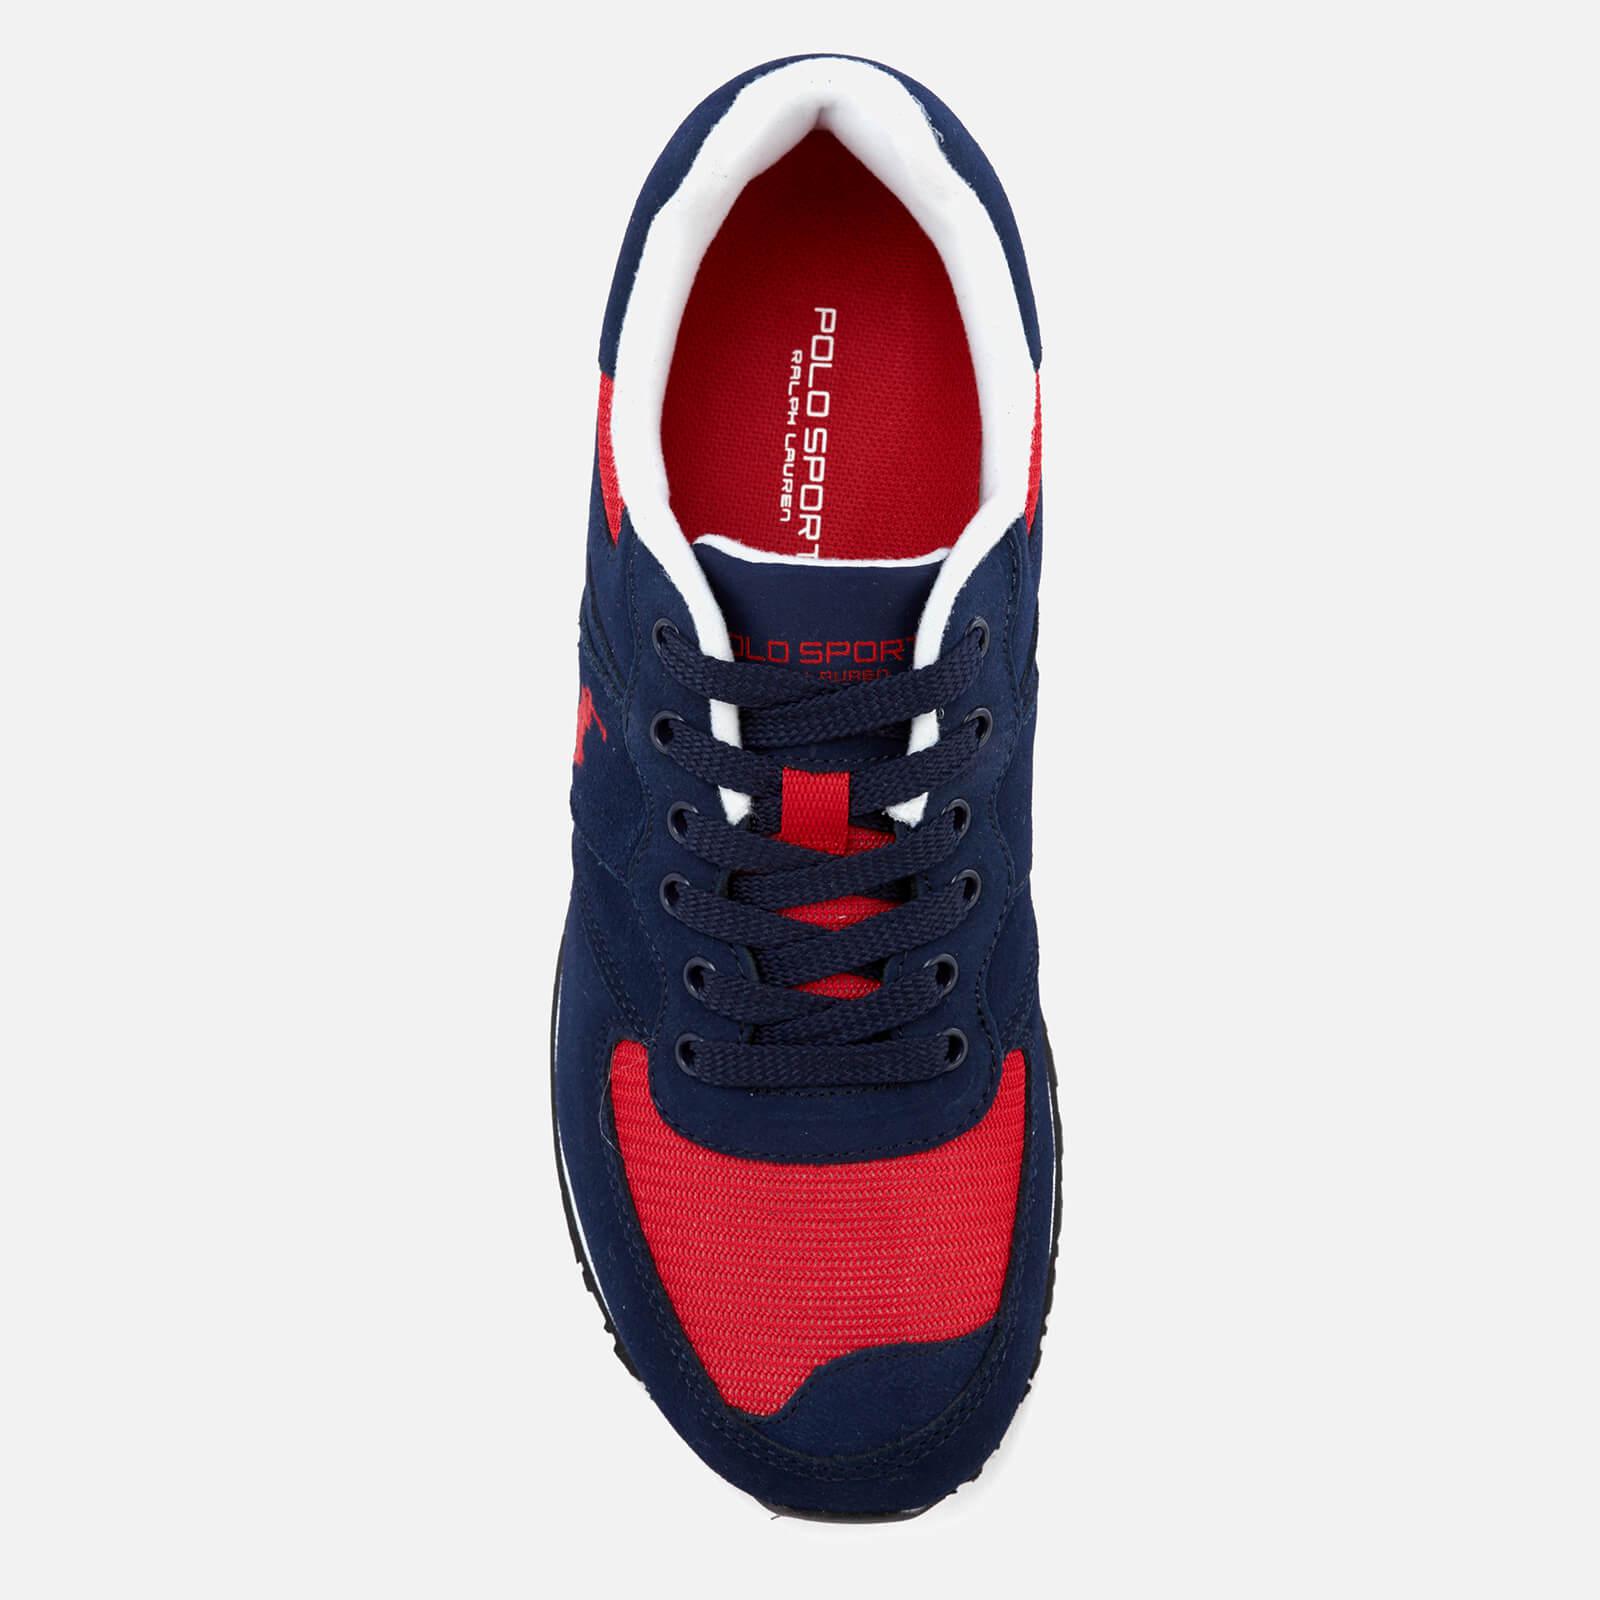 Polo Ralph Lauren Slaton Pony Sport Suede Trainers in Navy/Red (Blue) for  Men | Lyst